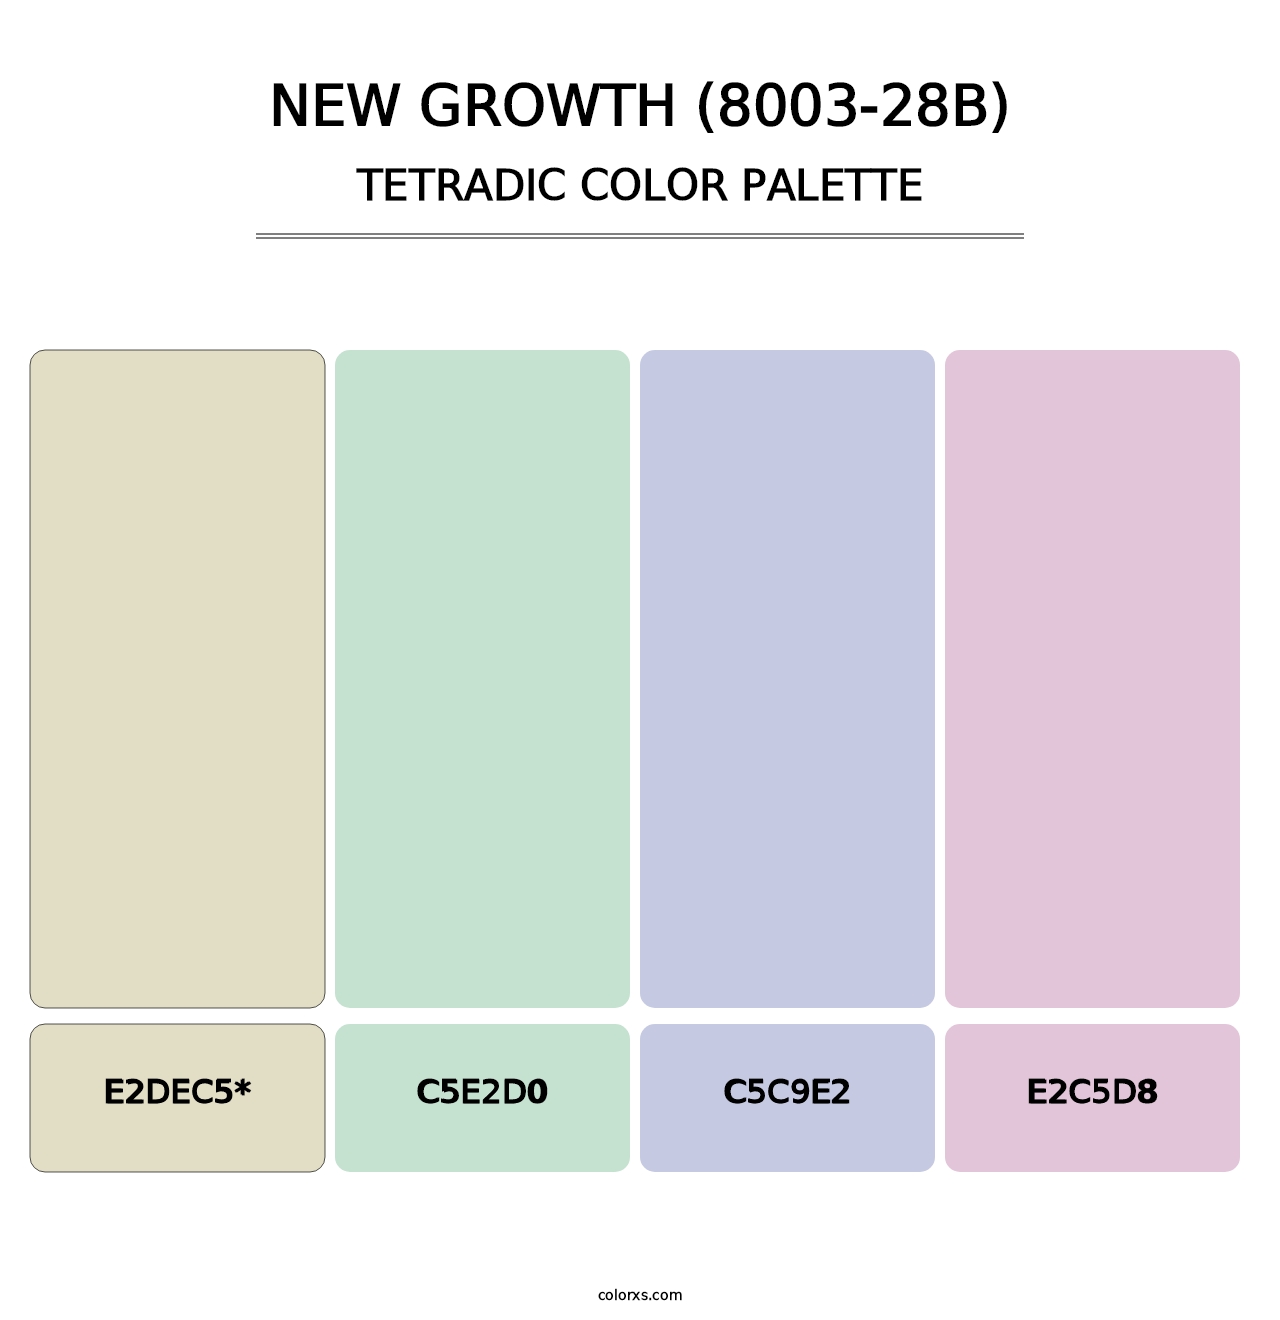 New Growth (8003-28B) - Tetradic Color Palette